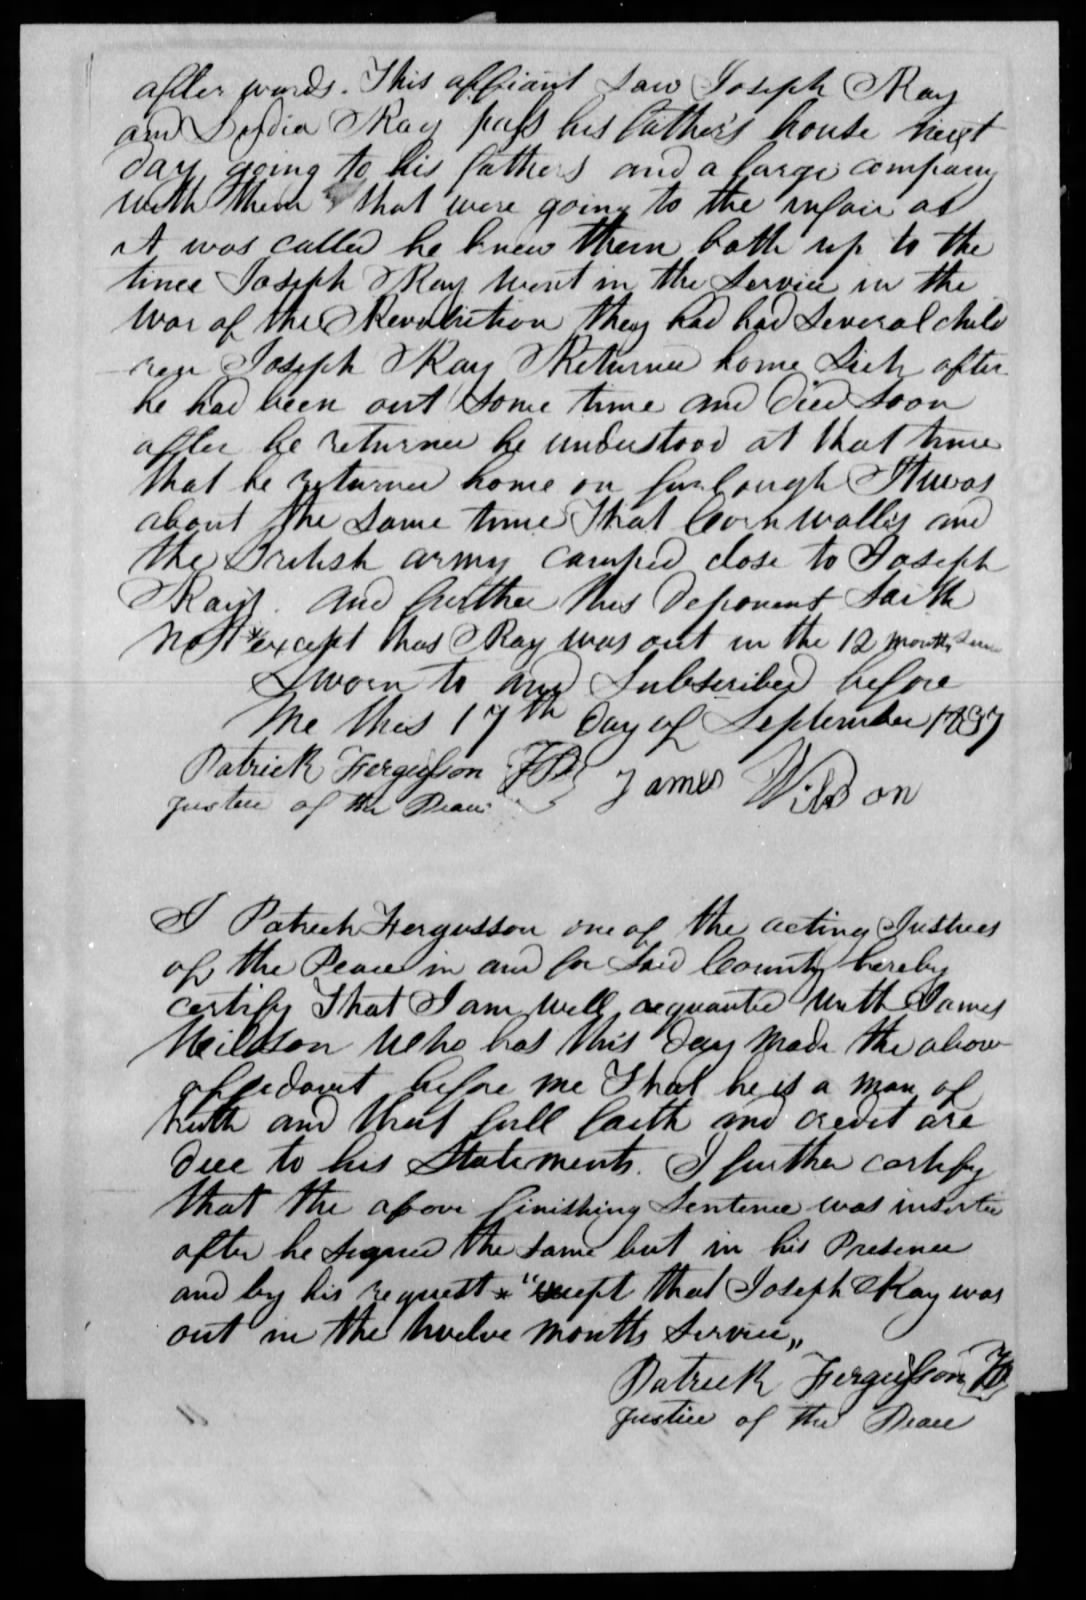 Affidavit of James Ellison in support of a Pension Claim for Lydia Ray, circa 11 September 1837, page 2